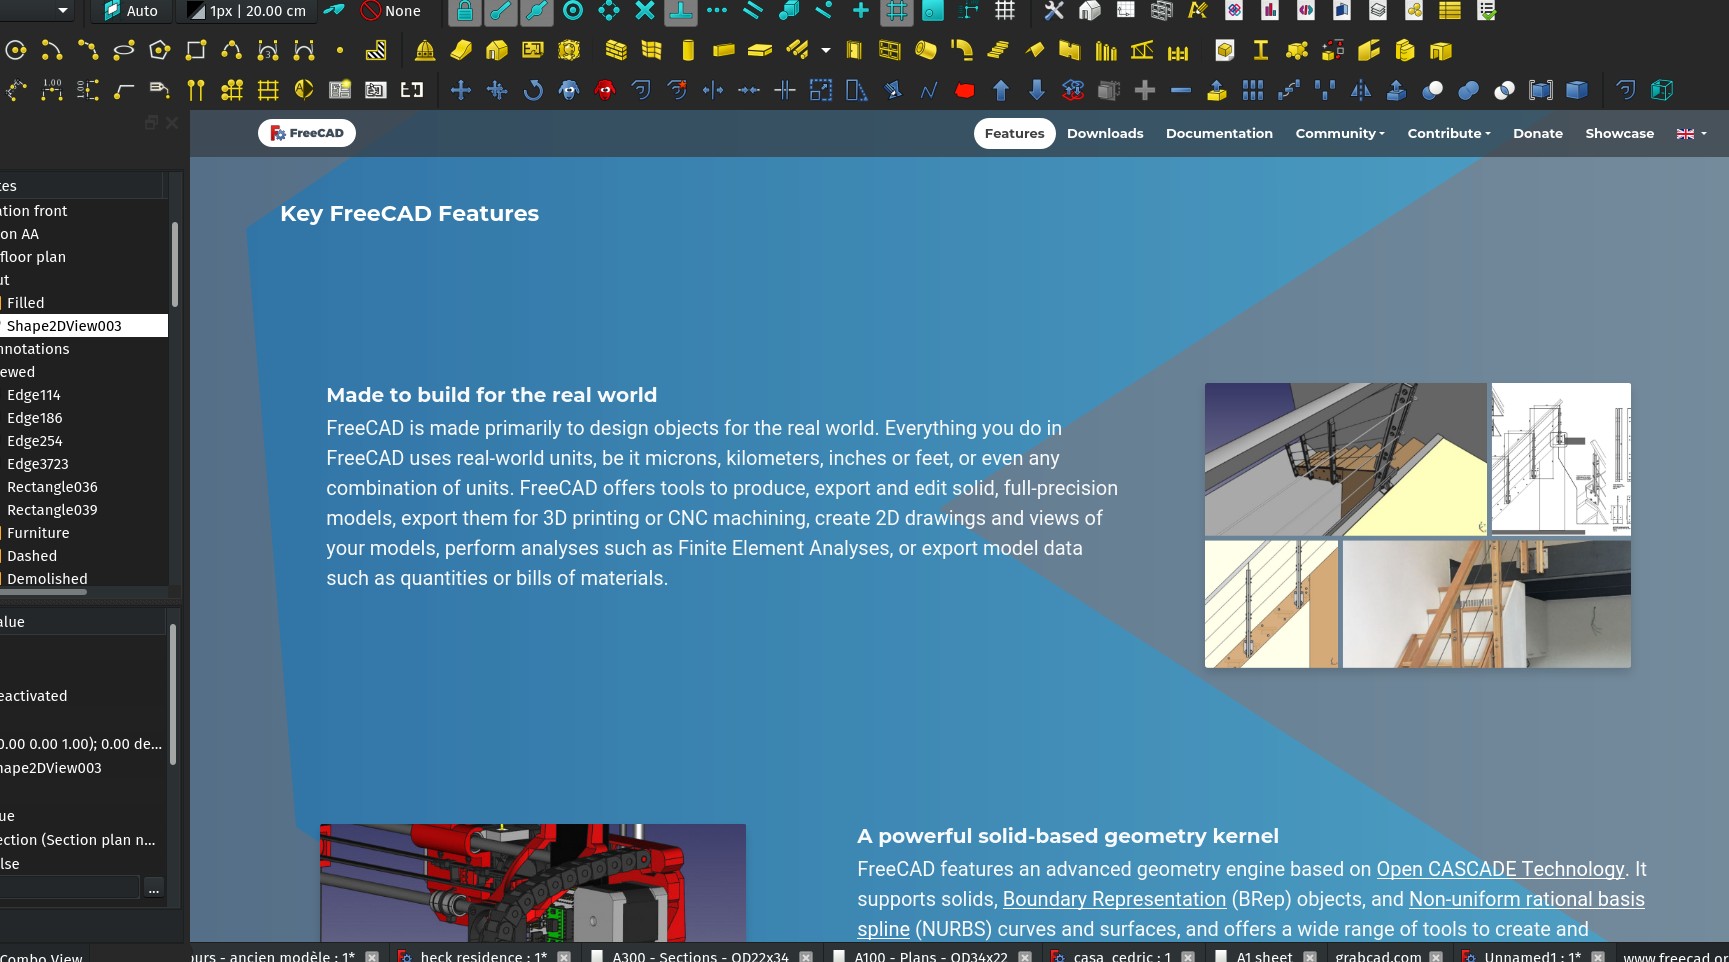 The Features page of the FreeCAD website